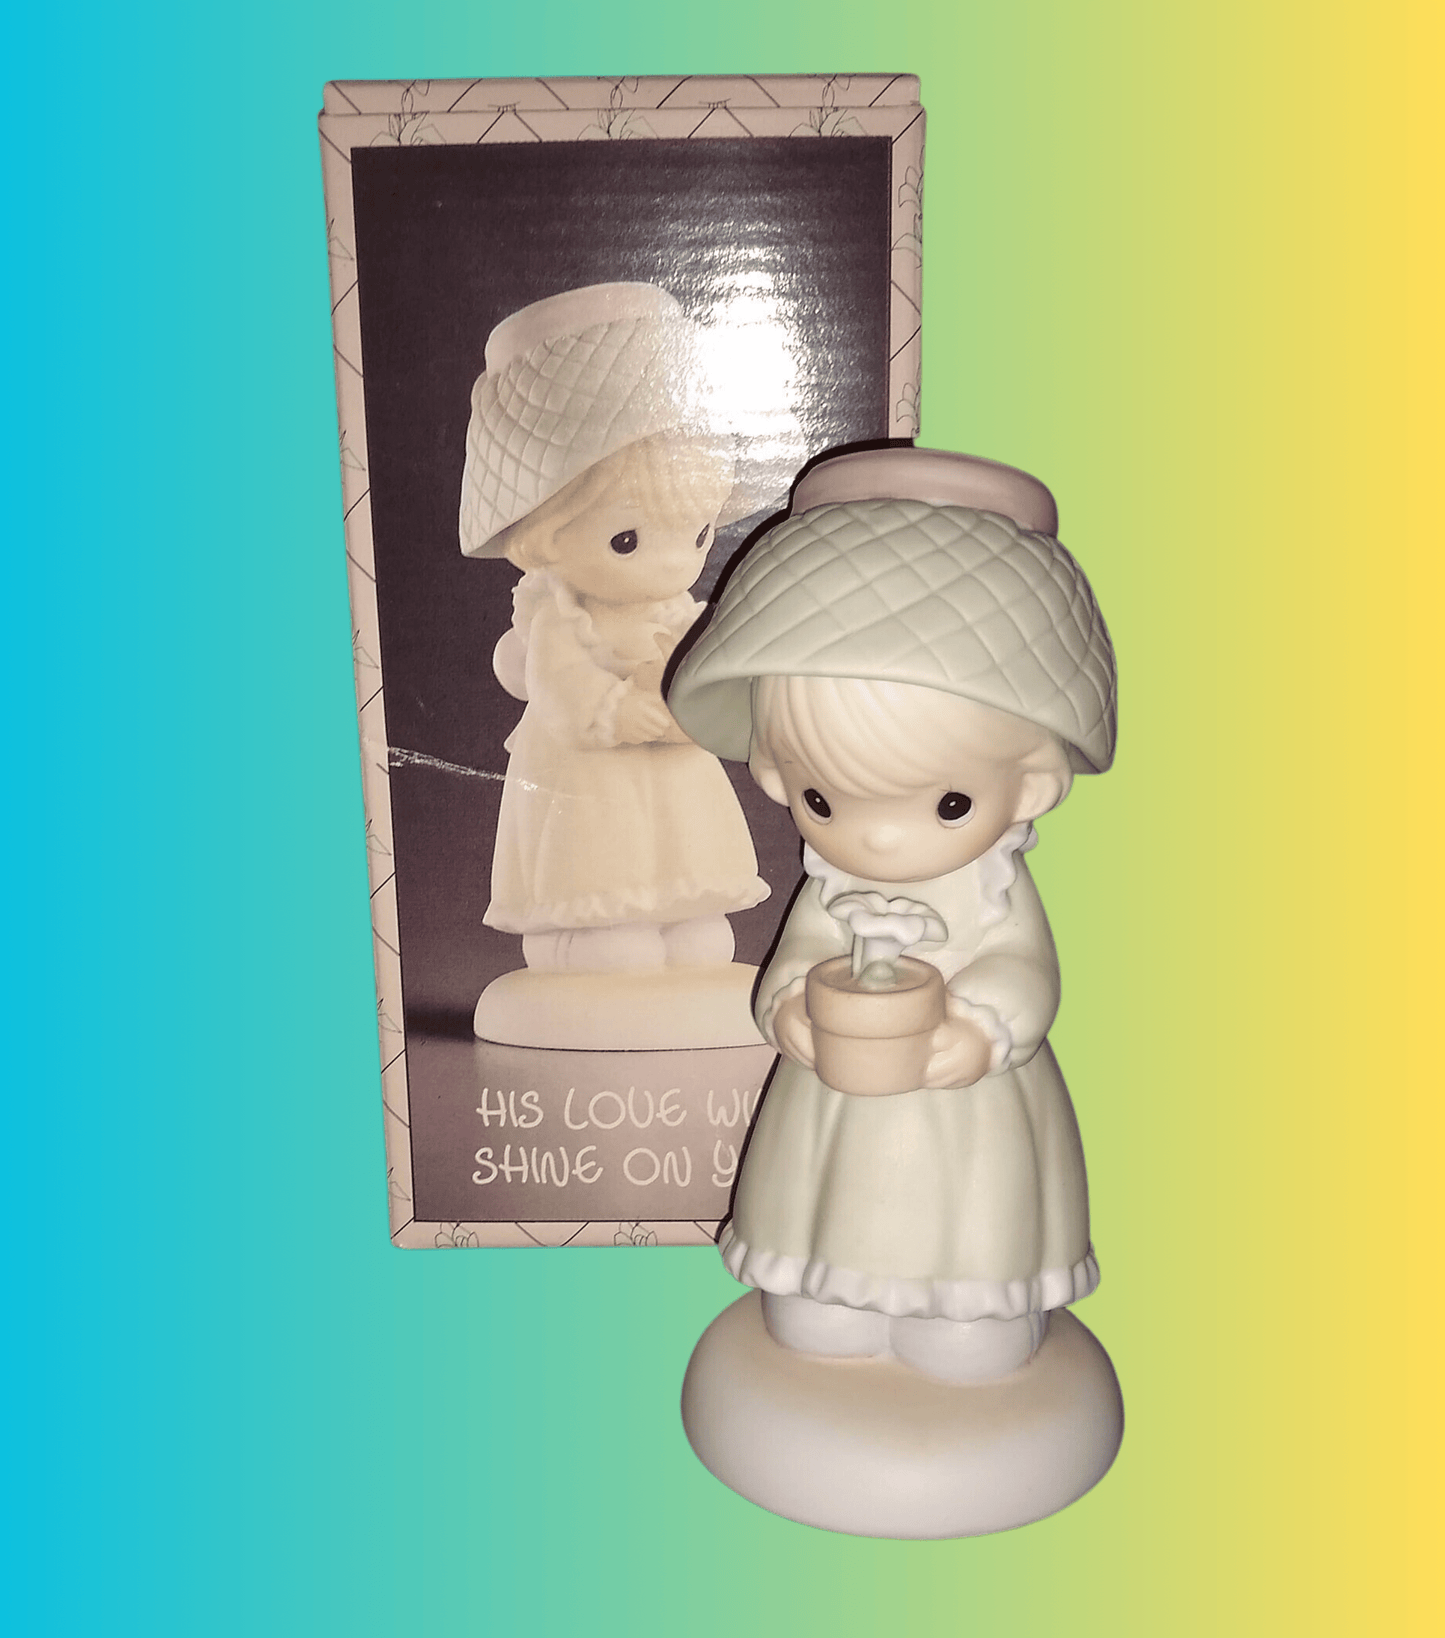 Precious Moments Figurine By Enesco.  His Love Will Shine On You Figurine Featuring A Woman Holding A Flower Pot With Flowers.